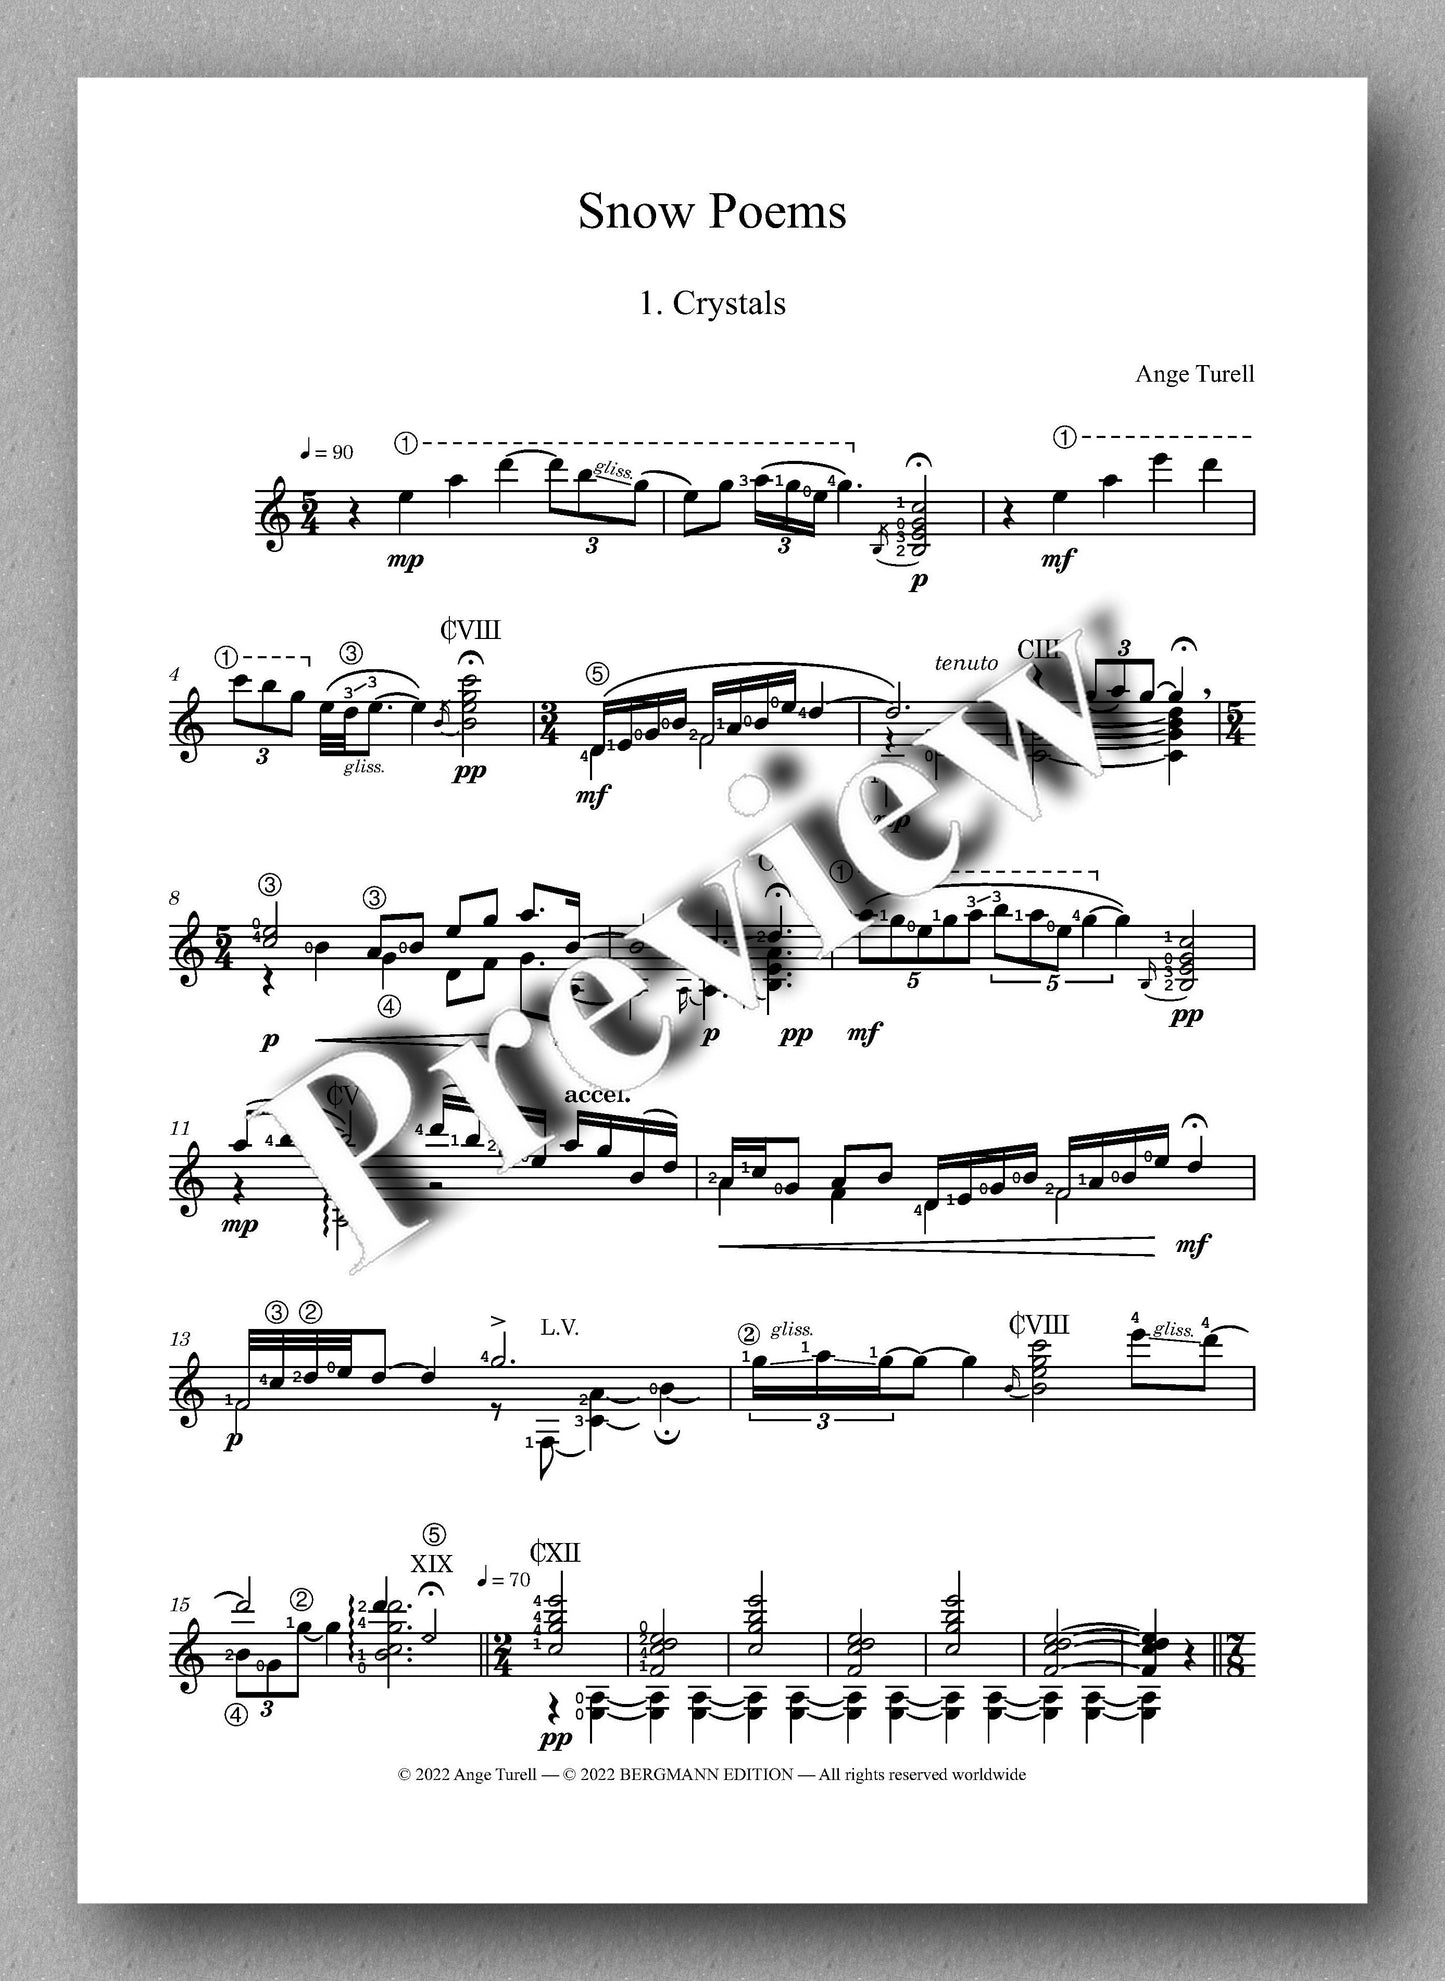 Ange Turell, Snow Poems - preview of the music score 1